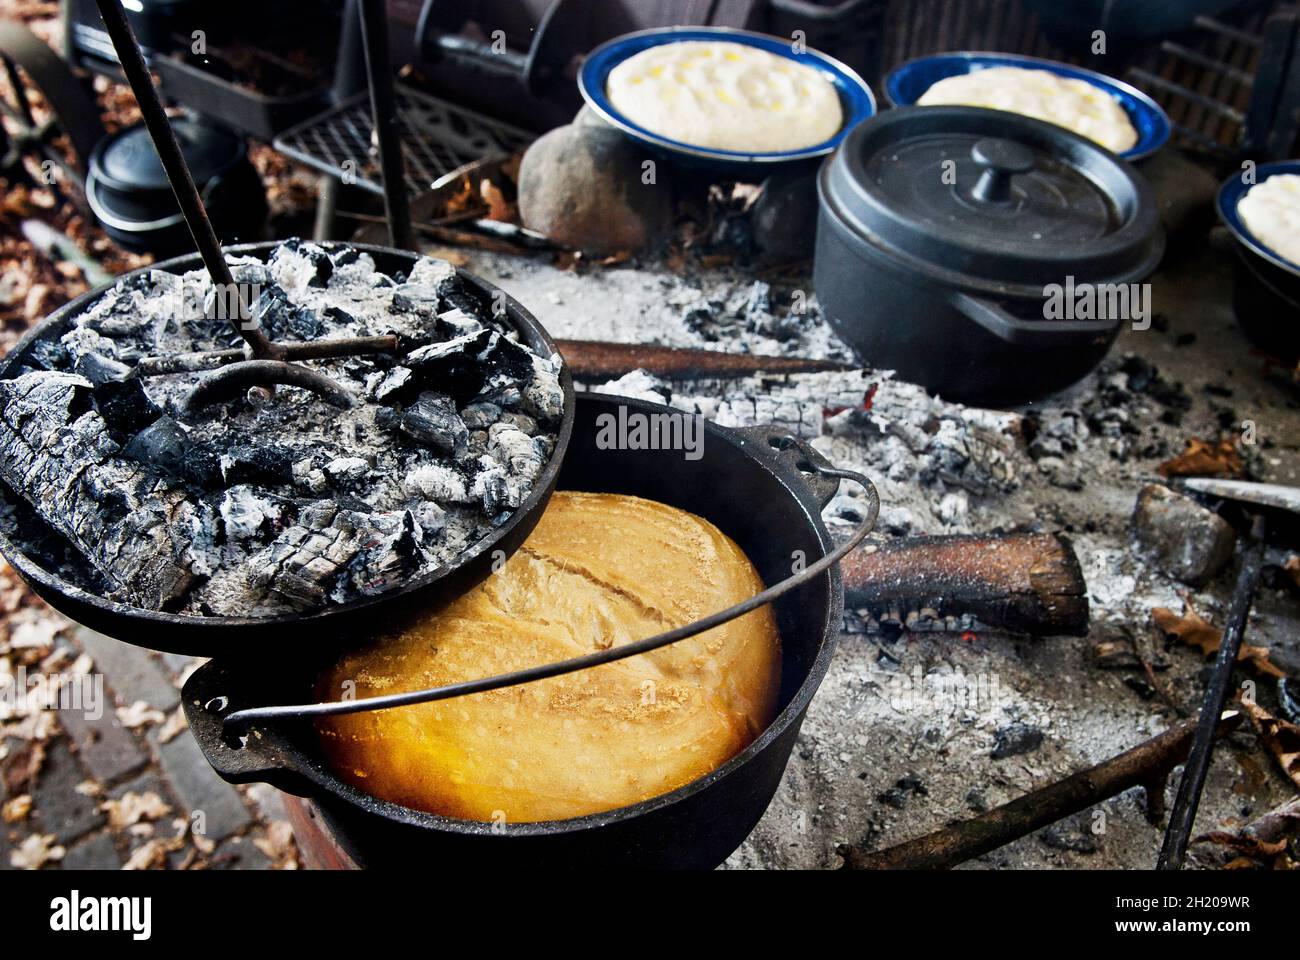 https://c8.alamy.com/comp/2H209WR/baking-bread-in-a-dutch-oven-over-a-fire-place-camping-2H209WR.jpg